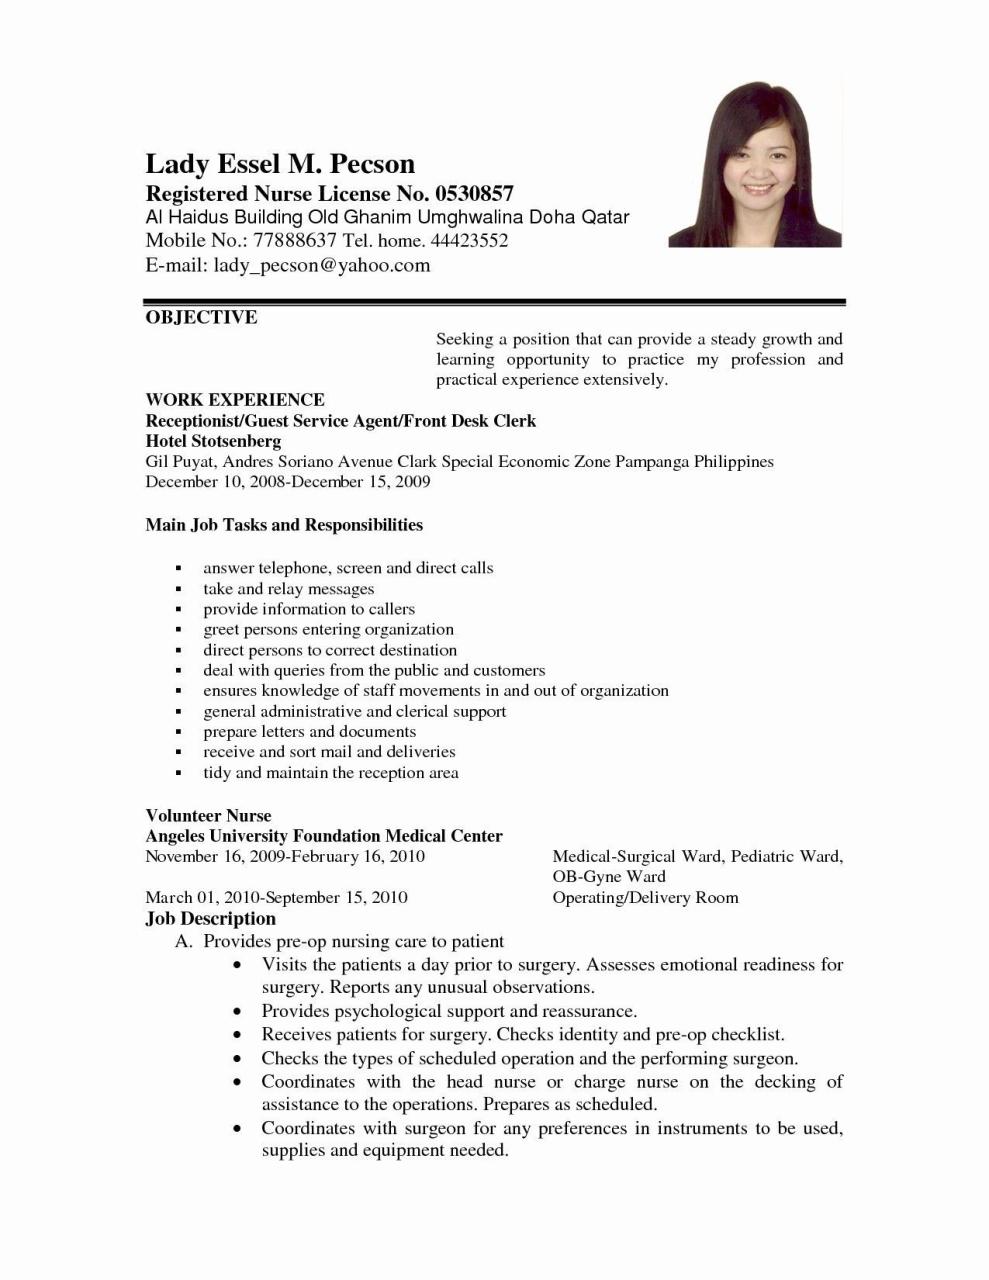 Sample Resume For Receptionist With No Experience